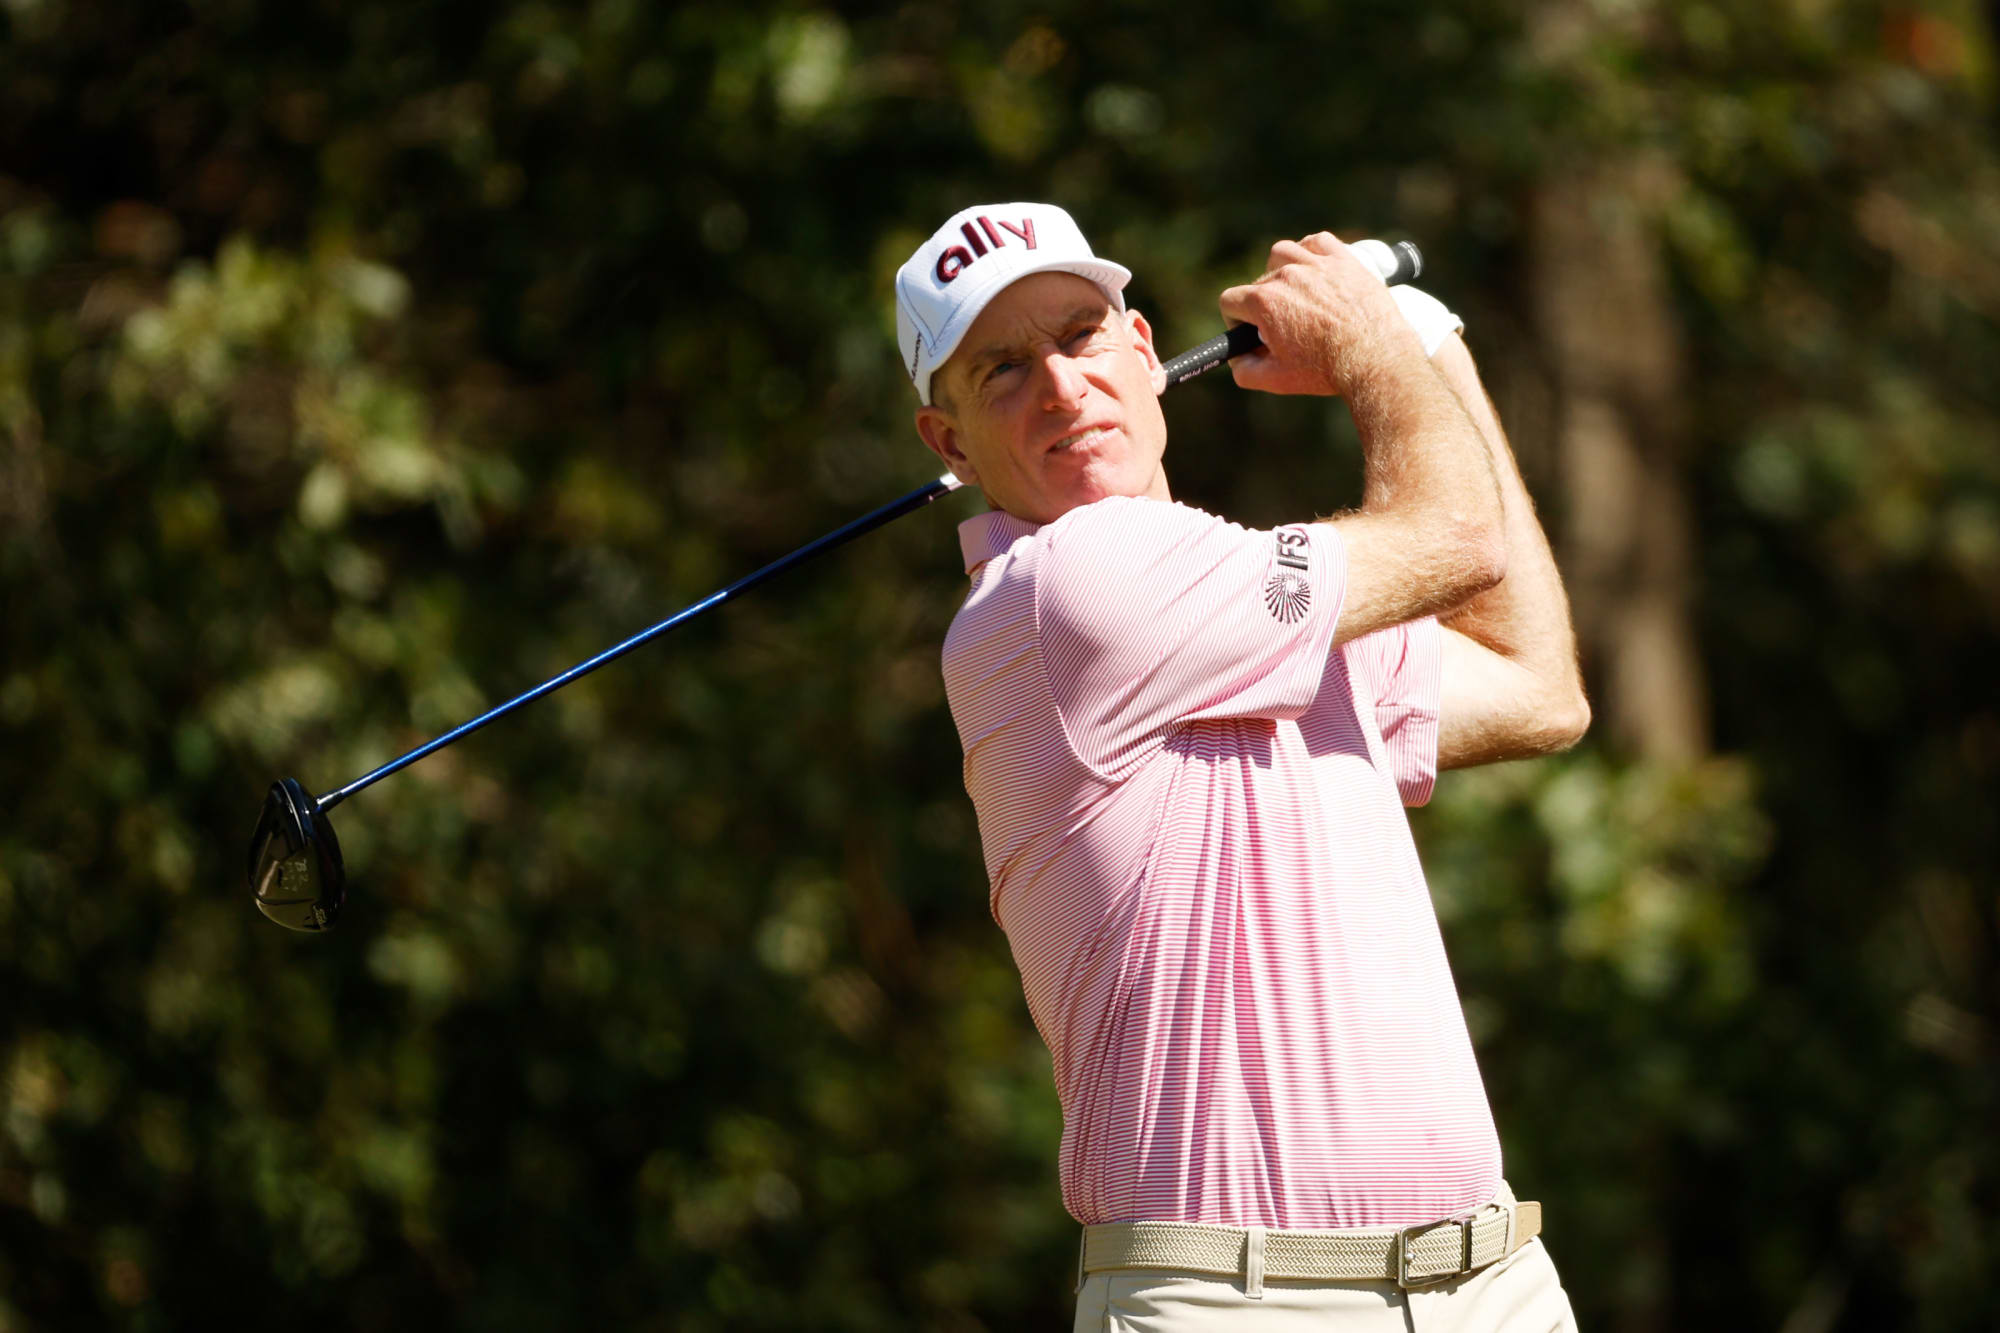 Tournament Host Jim Furyk in The Mix at Constellation Furyk and Friends